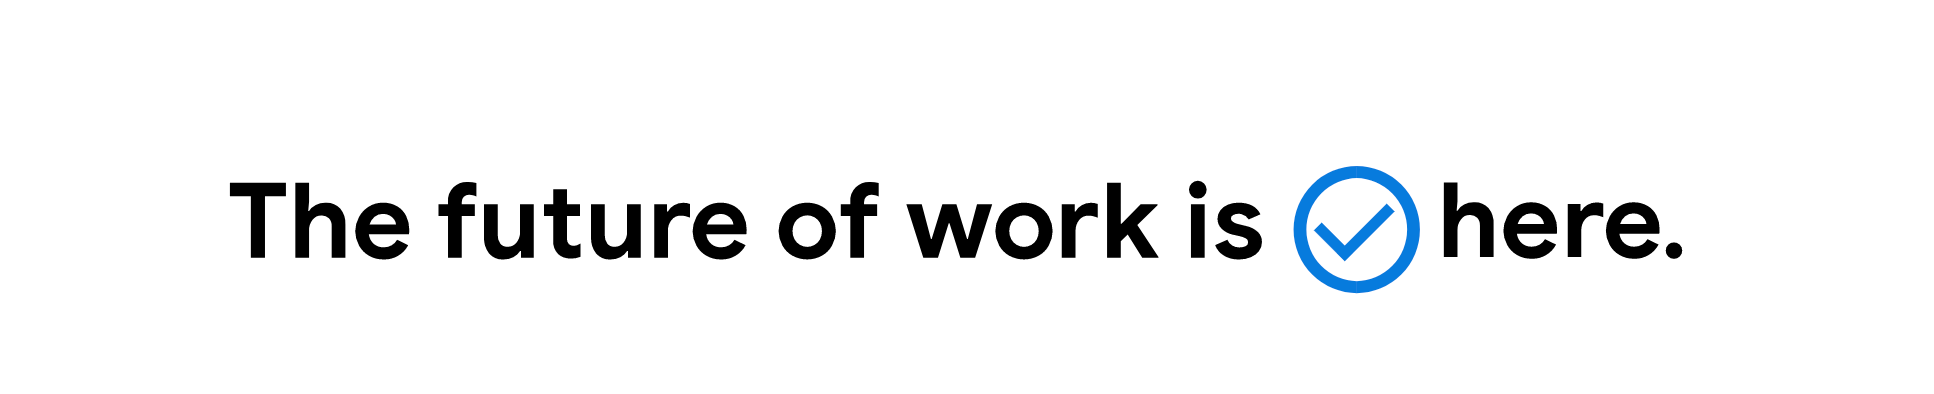 Future of Work is here